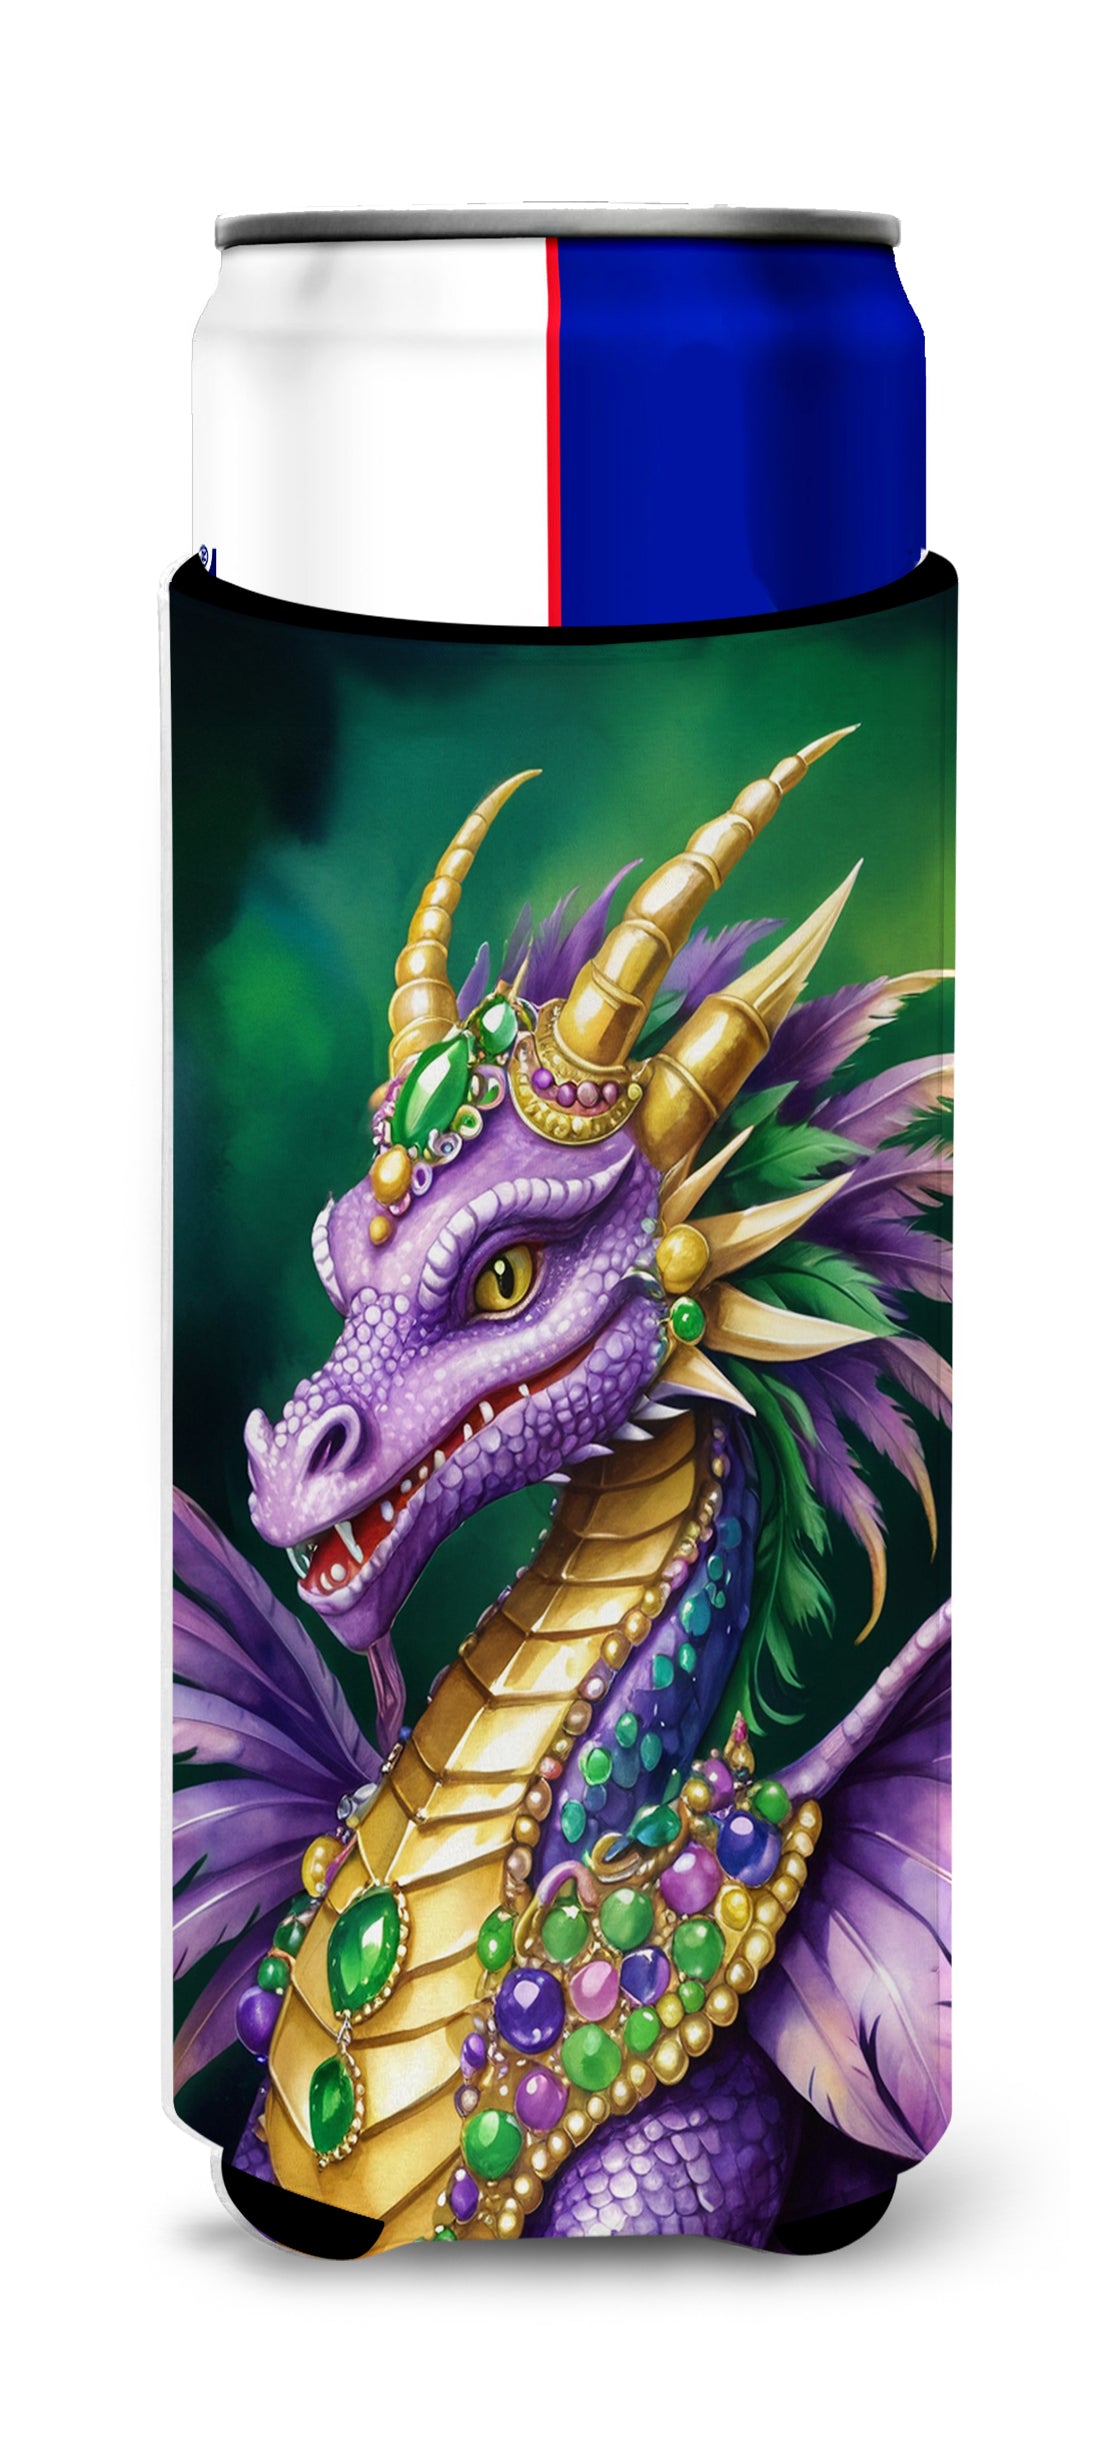 Buy this Dragon King of Mardi Gras Hugger for Ultra Slim Cans